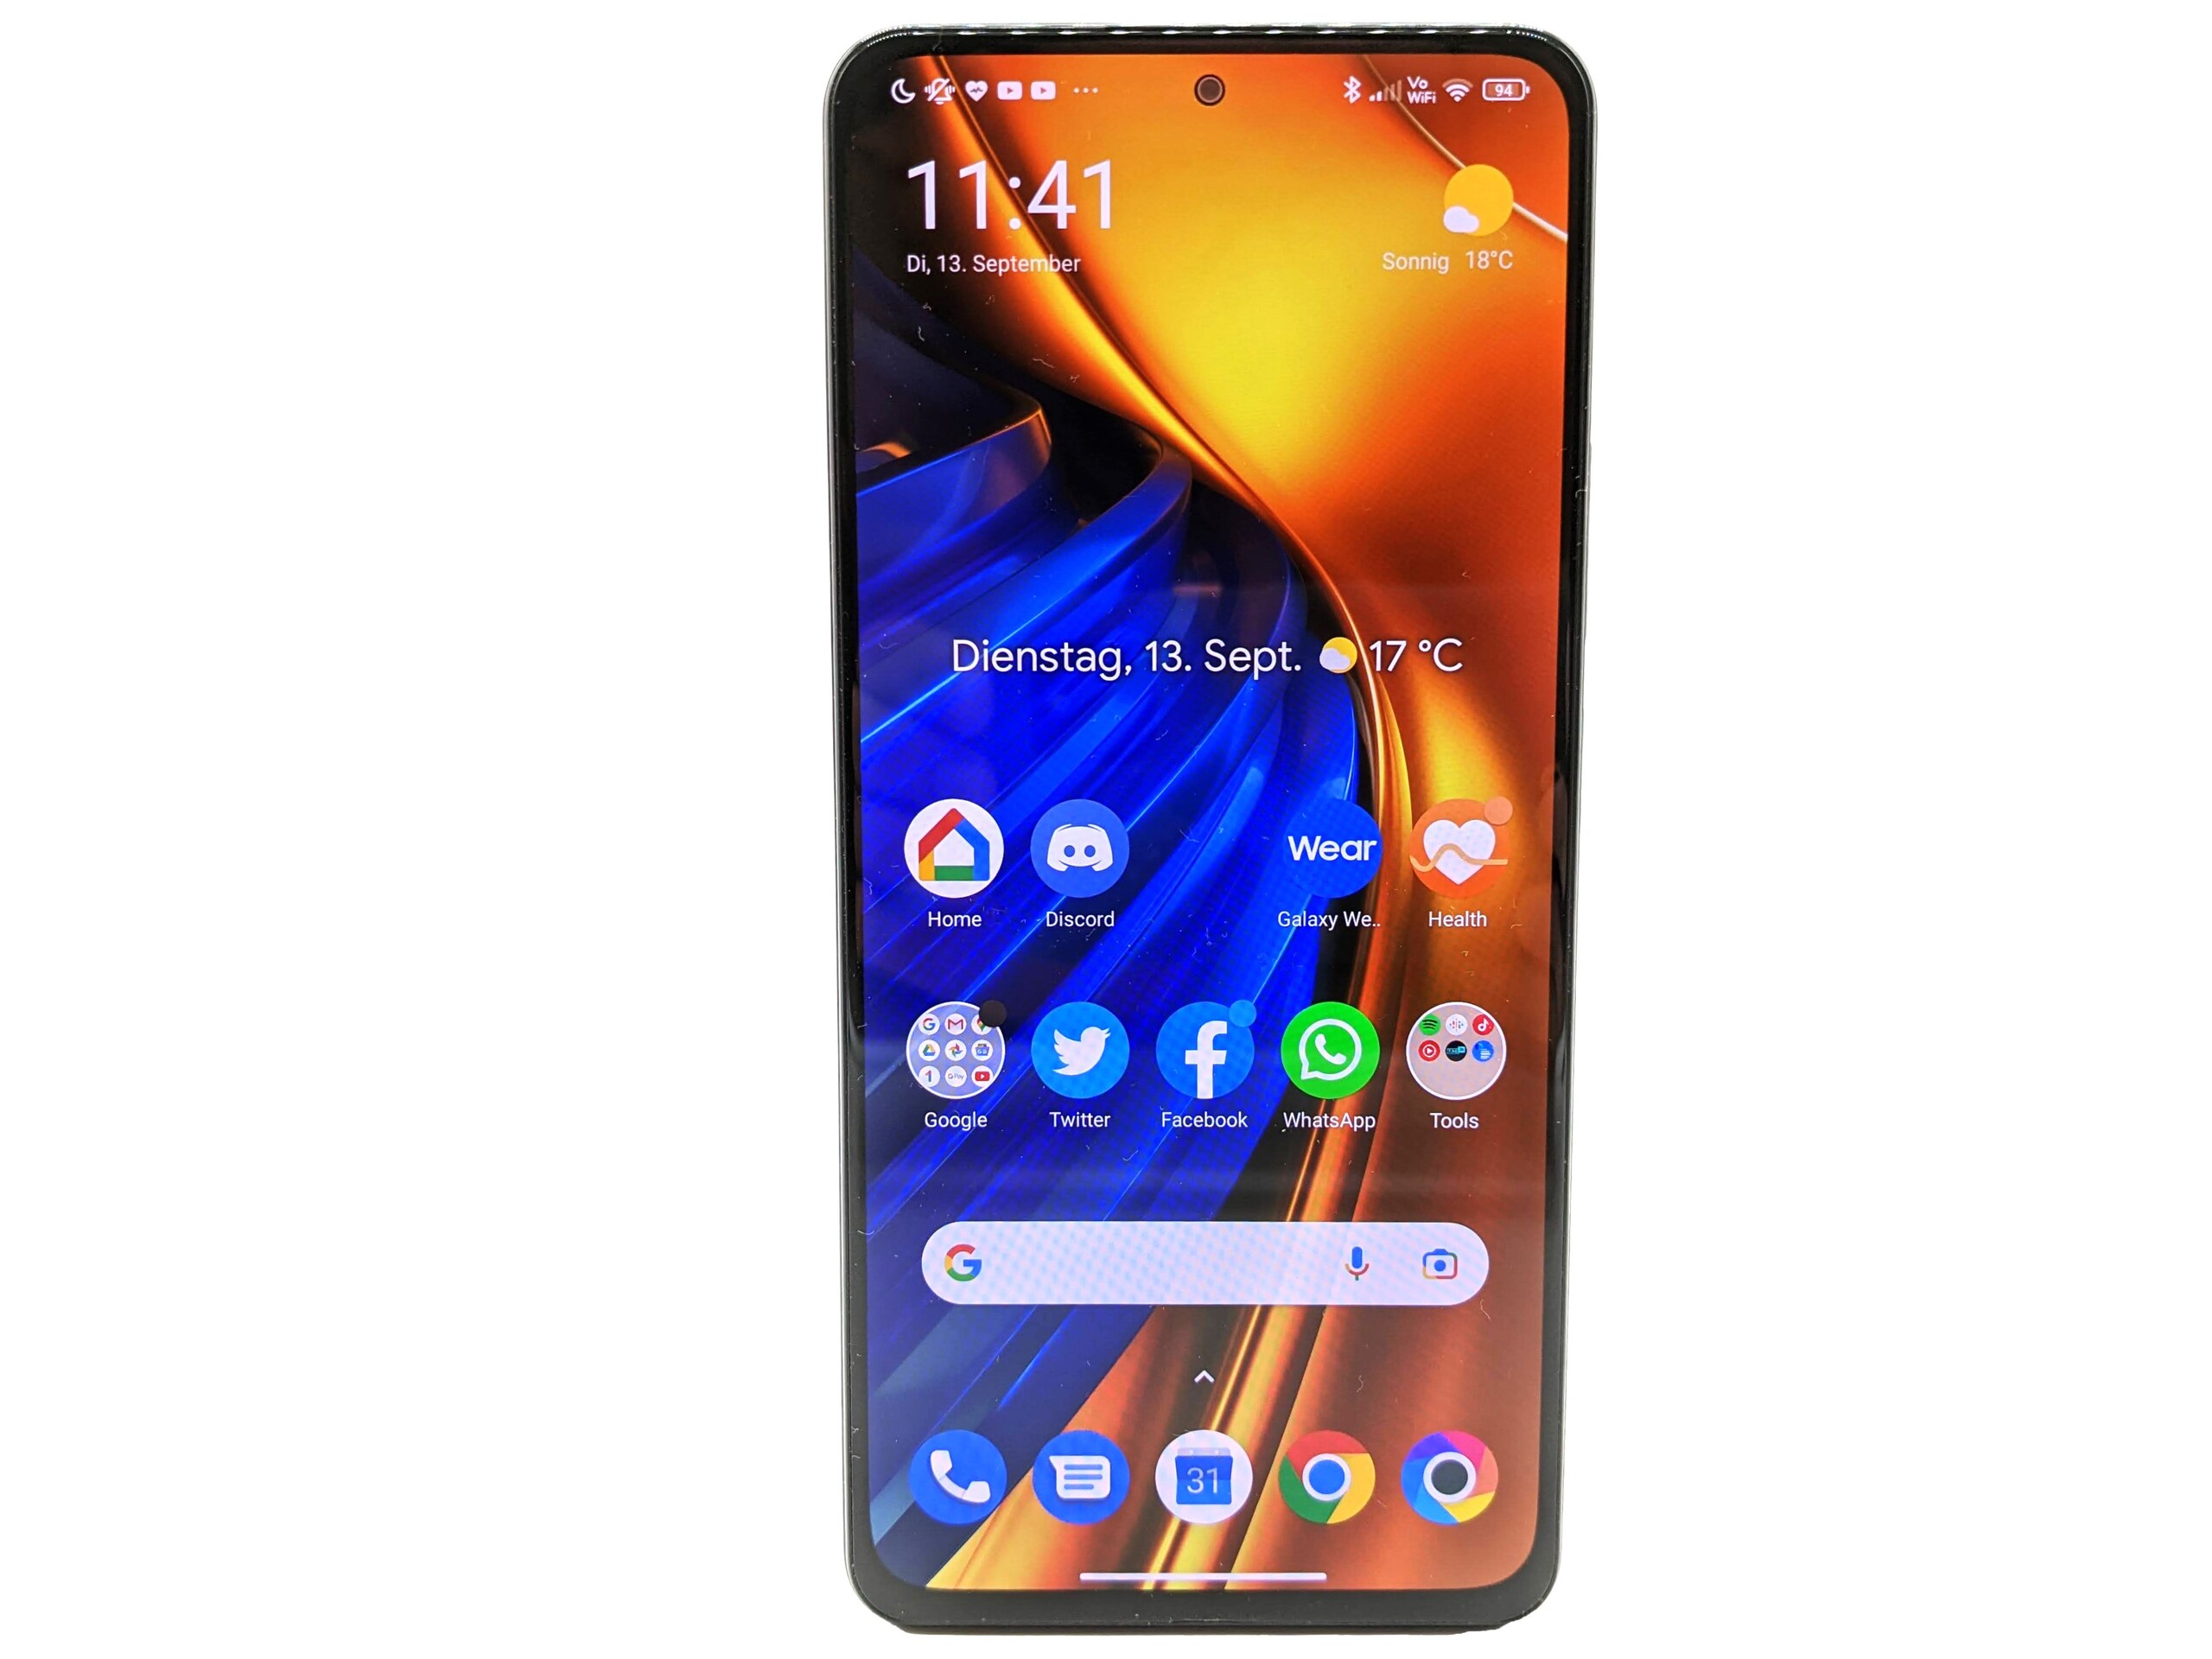 POCO F4 technical specifications 